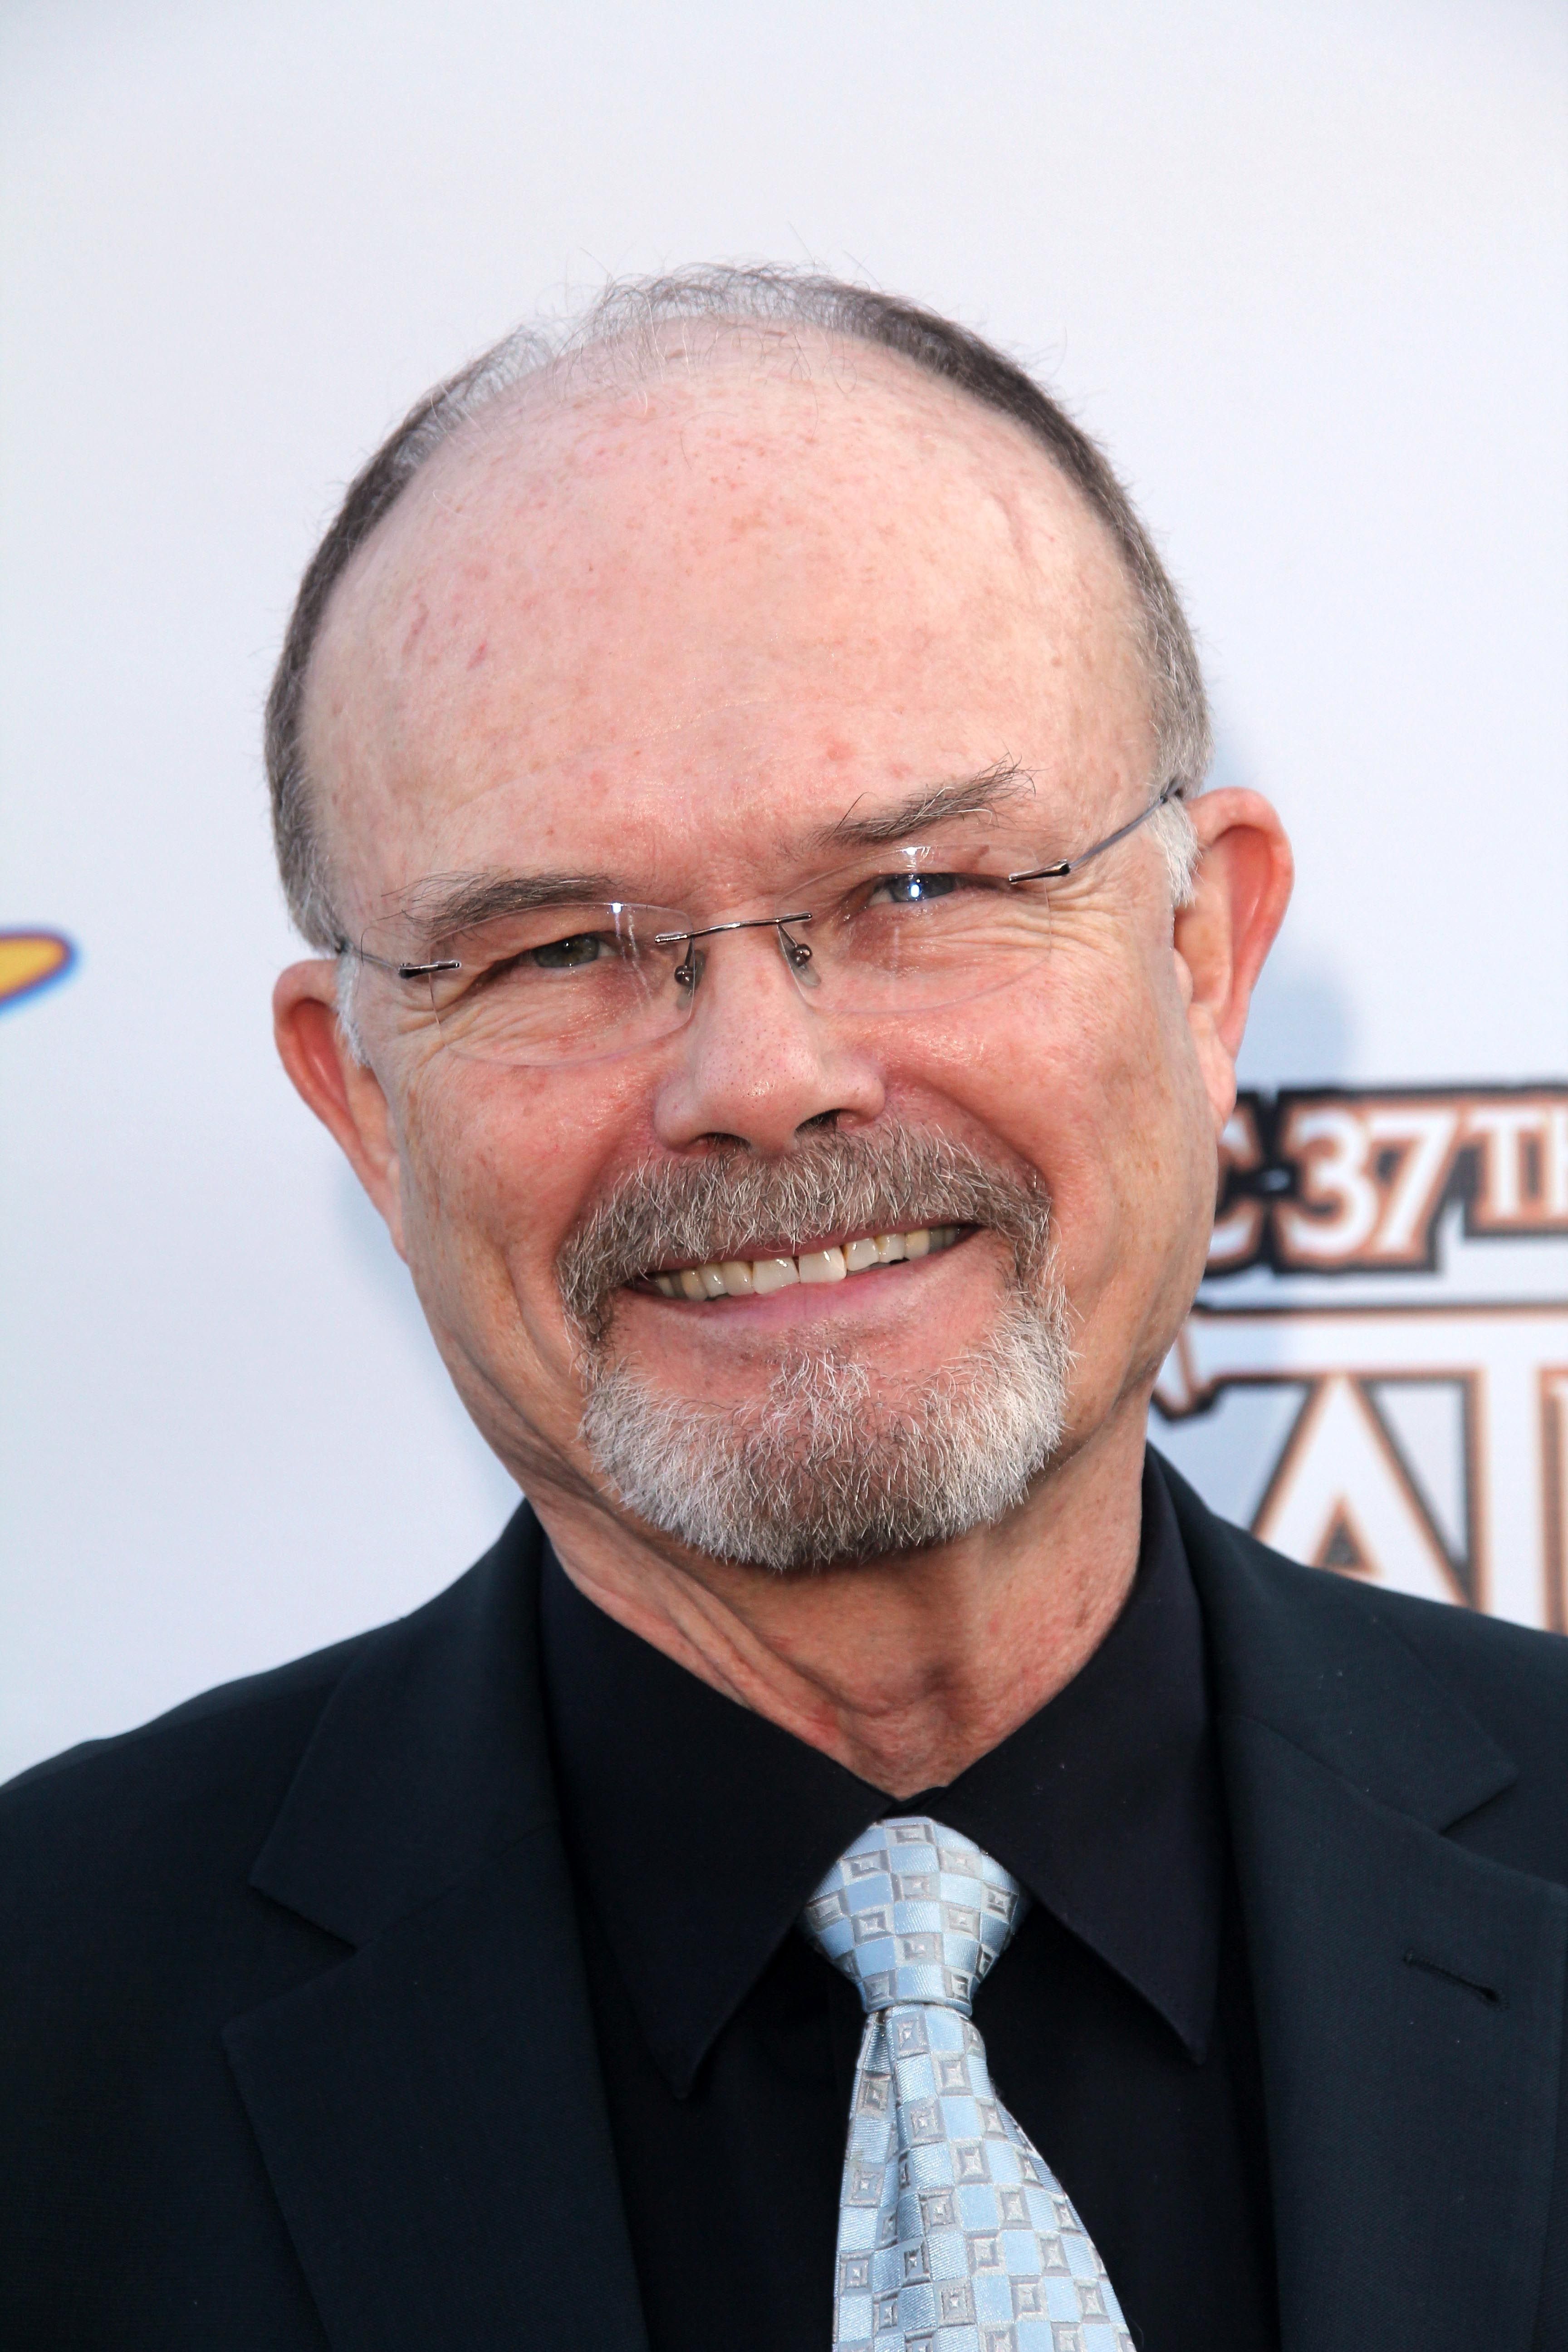 Kurtwood Smith smiles in a black shirt and light blue tie.